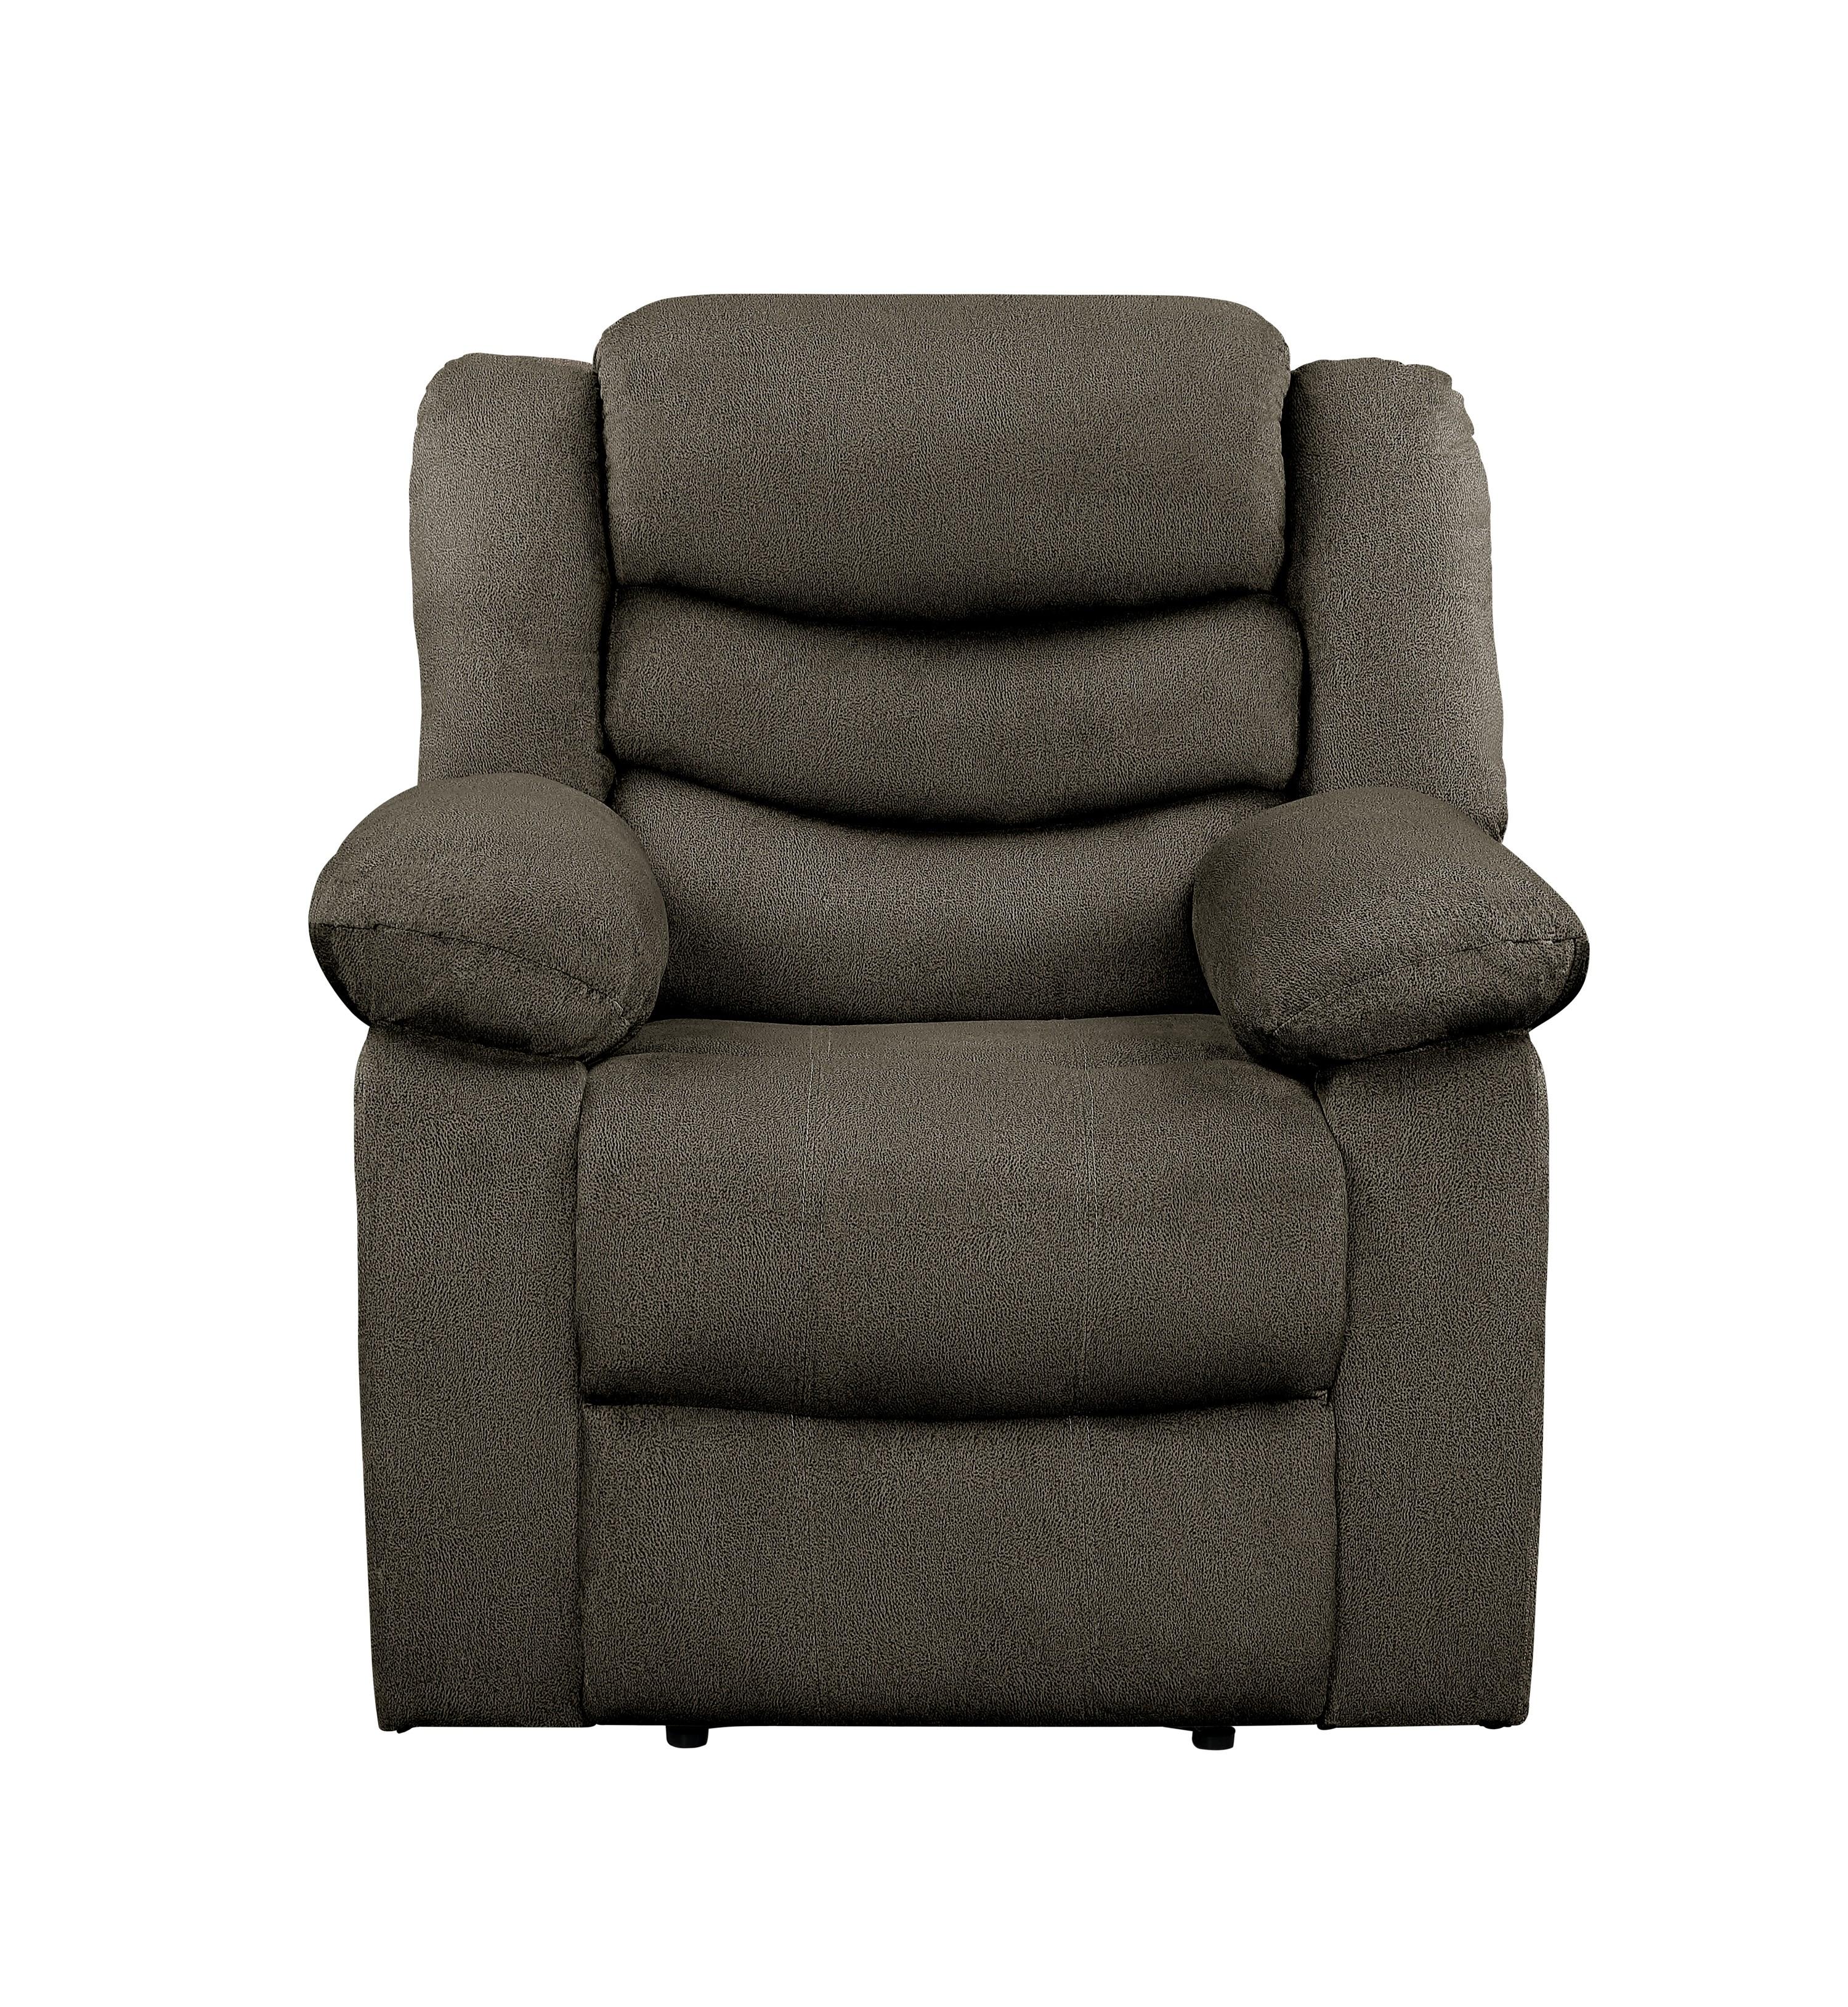 

    
Transitional Brown Microfiber Reclining Chair Homelegance 9526BR-1 Discus
